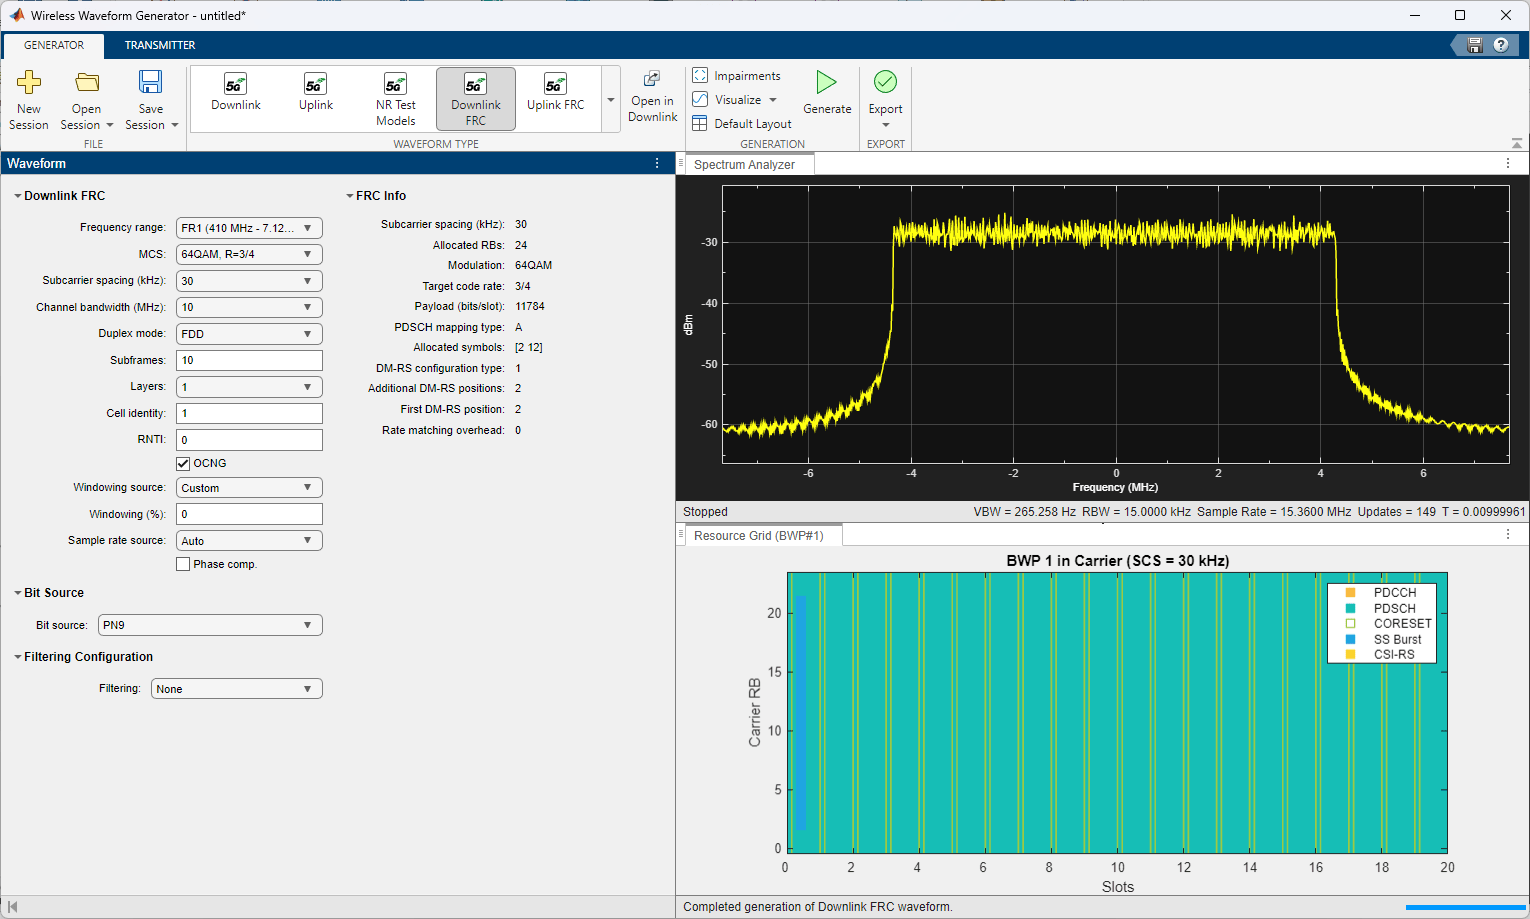 Screencap of the Wireless Waveform Generator app configured with the specified downlink FRC parameters.